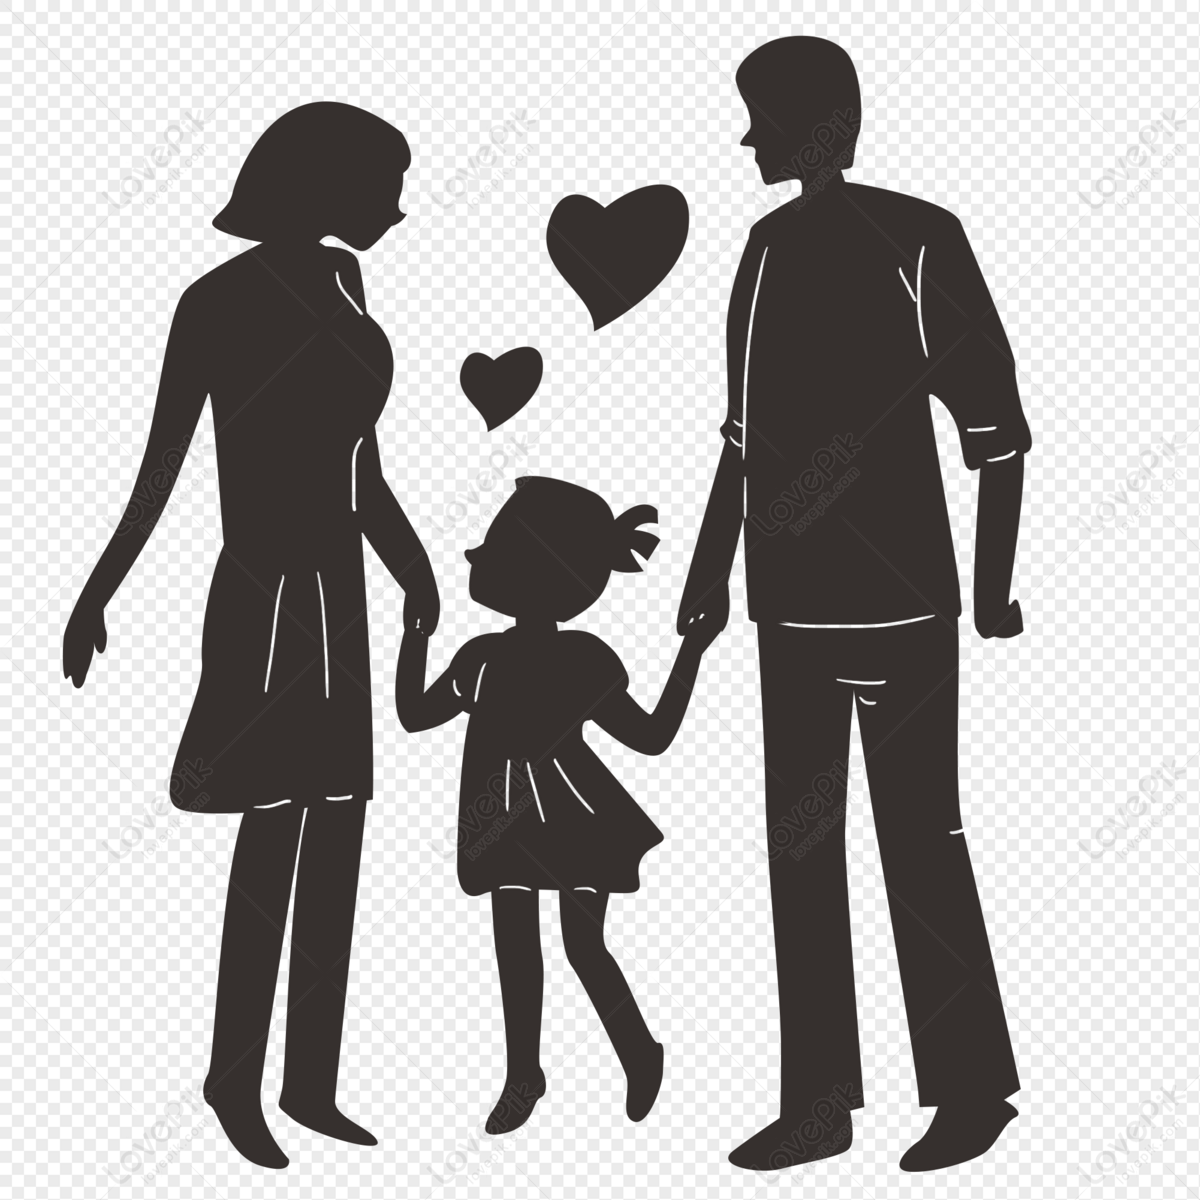 Family of three silhouette family portrait, family, caring, family silhouette png hd transparent image